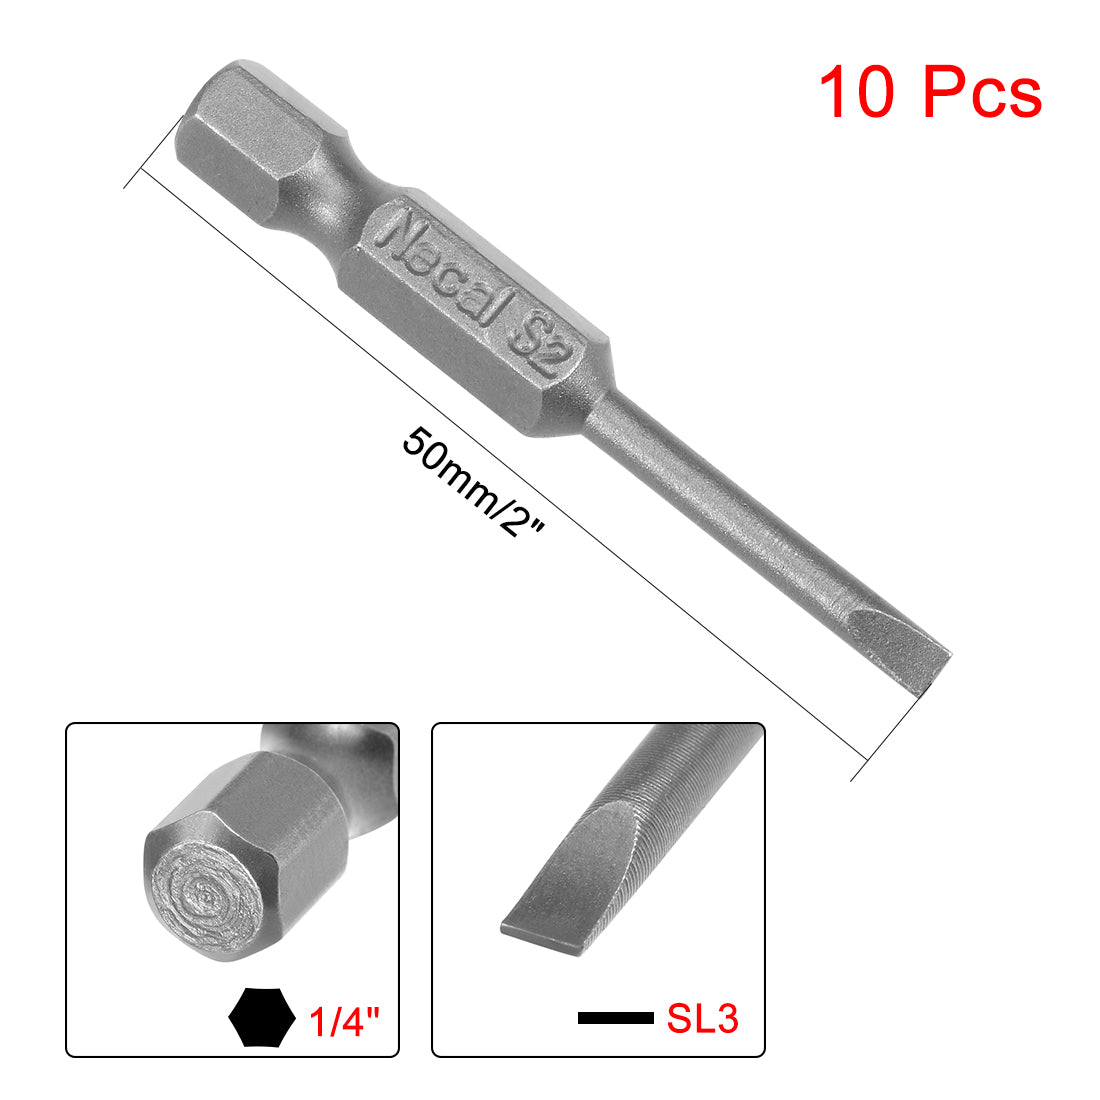 uxcell Uxcell 10Pcs 1/4" Hex Shank 50mm Length Magnetic SL3 Slot Head Screwdriver Bits S2 Alloy Steel